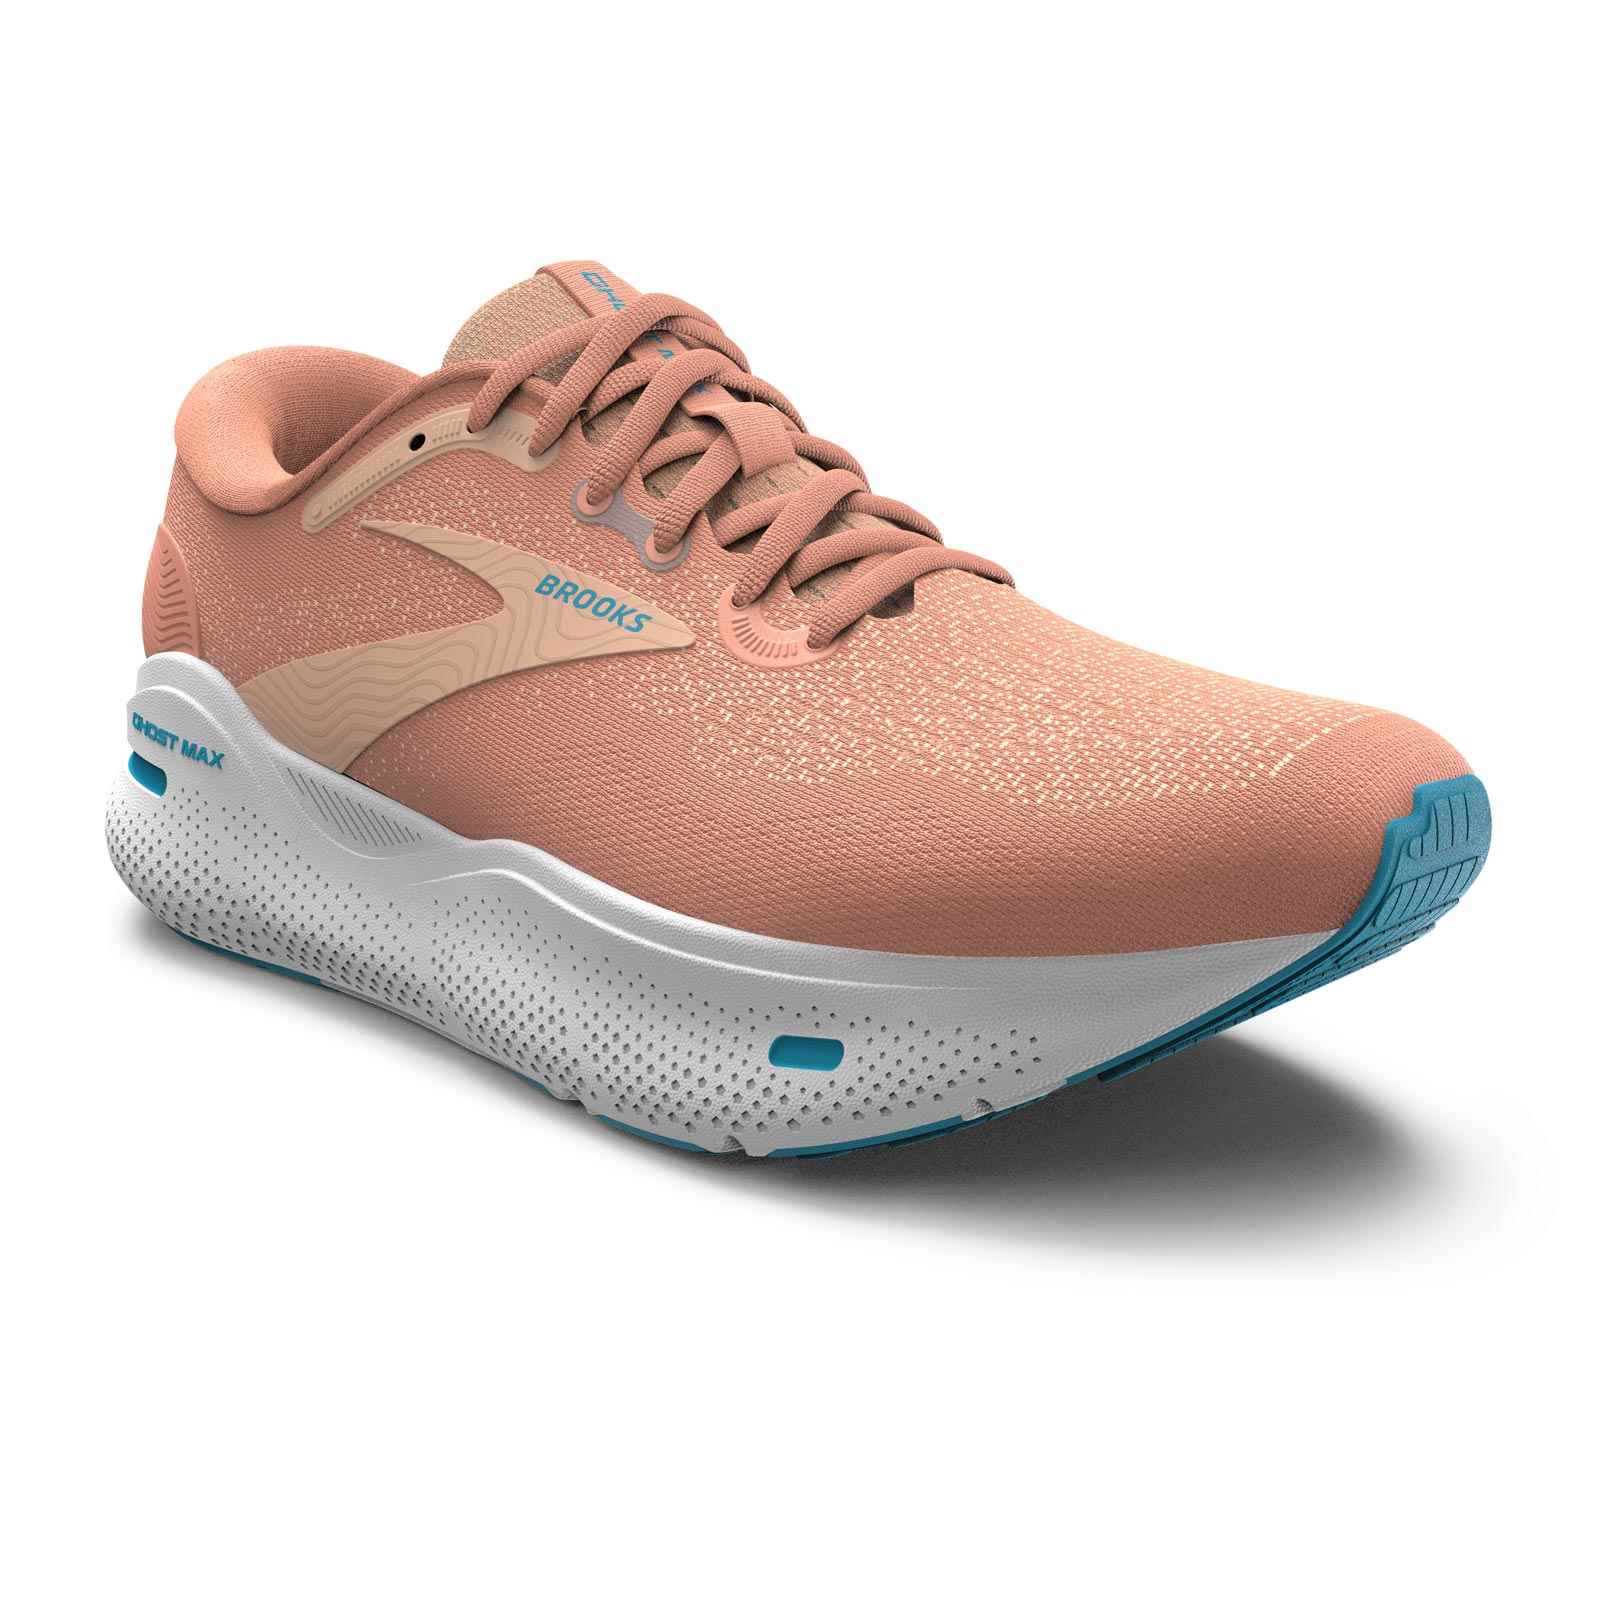 BROOKS GHOST MAX WOMENS RUNNING SHOES